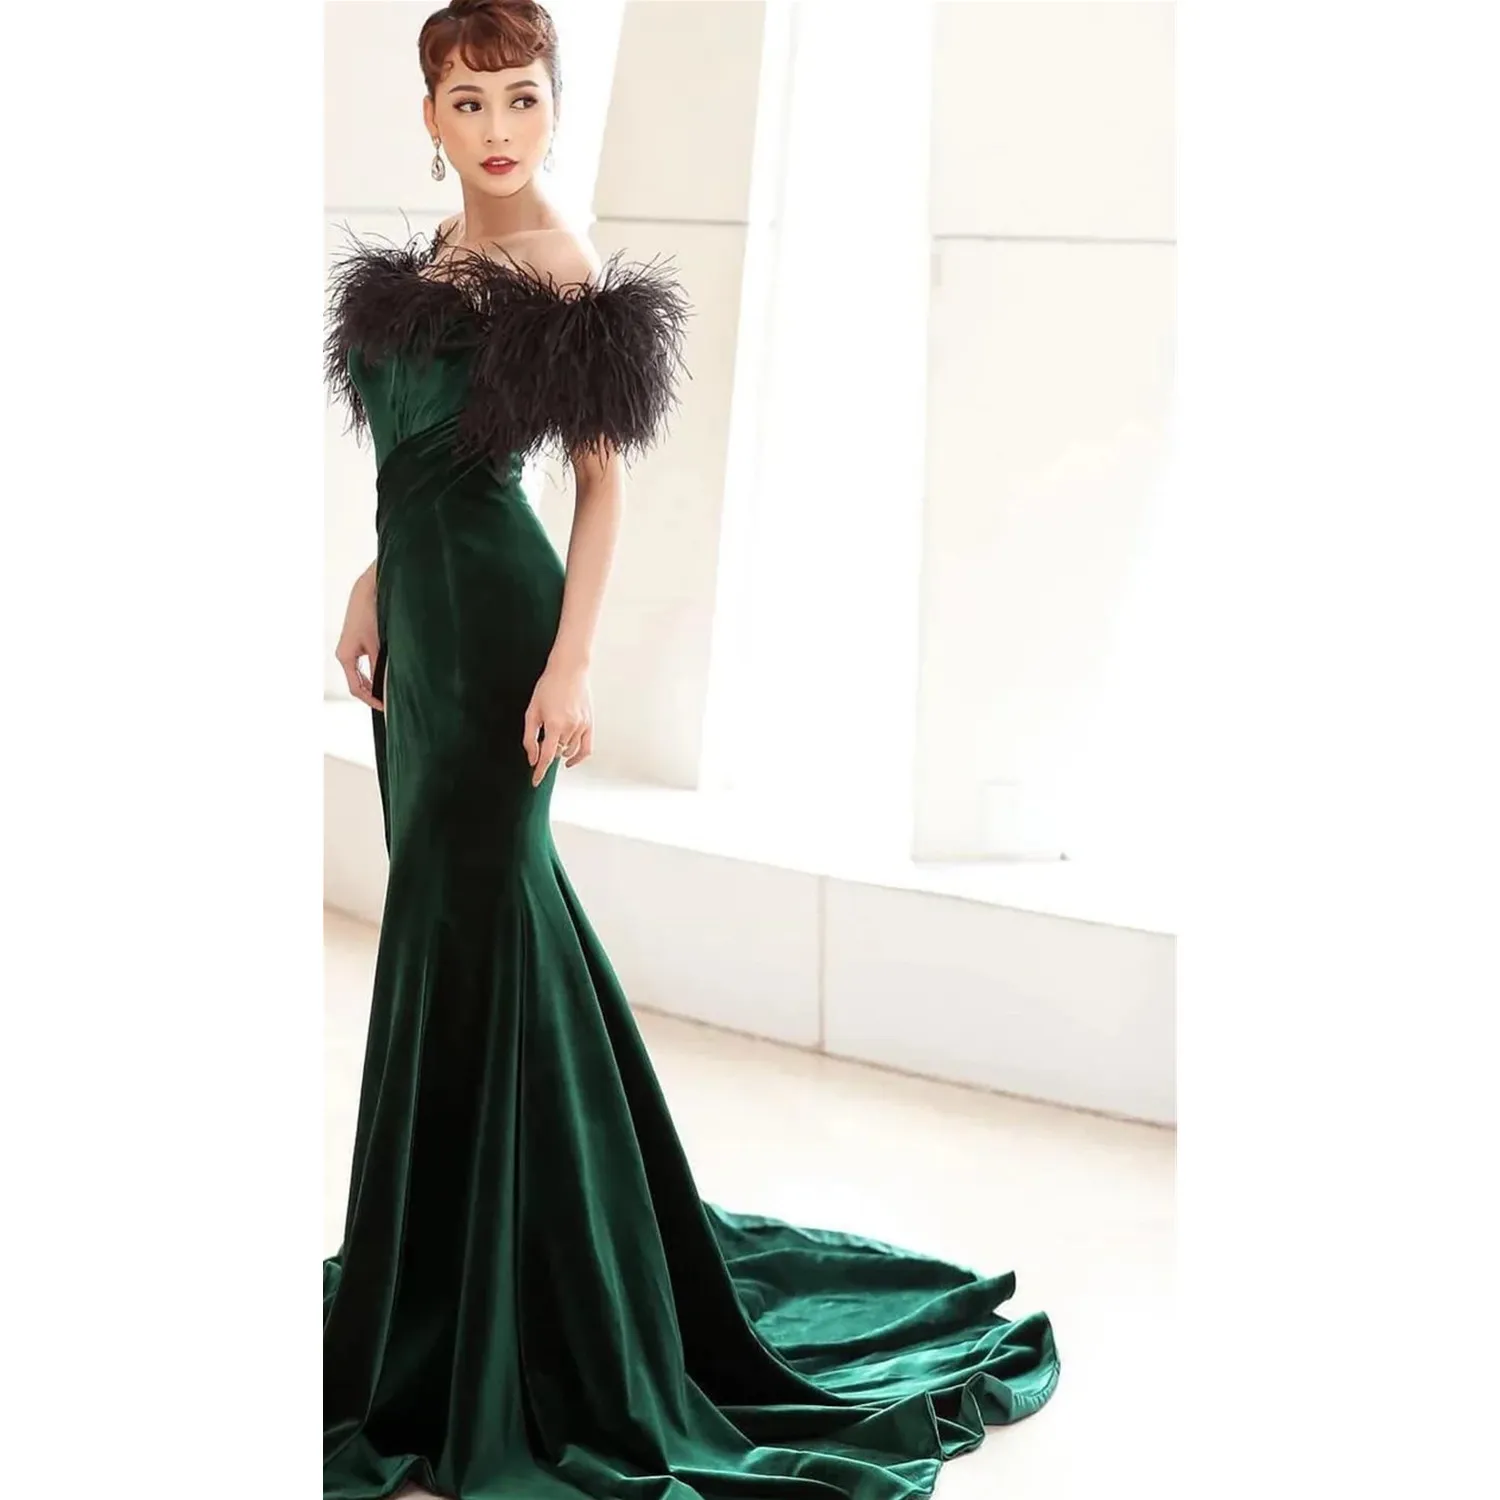 Elegant Mermaid Grape Velvet Evening Dresses With Black Feathers Sexy Side High Split Long Prom Dresses For Women 2023 Robes De Soriee Special Occasion Gowns